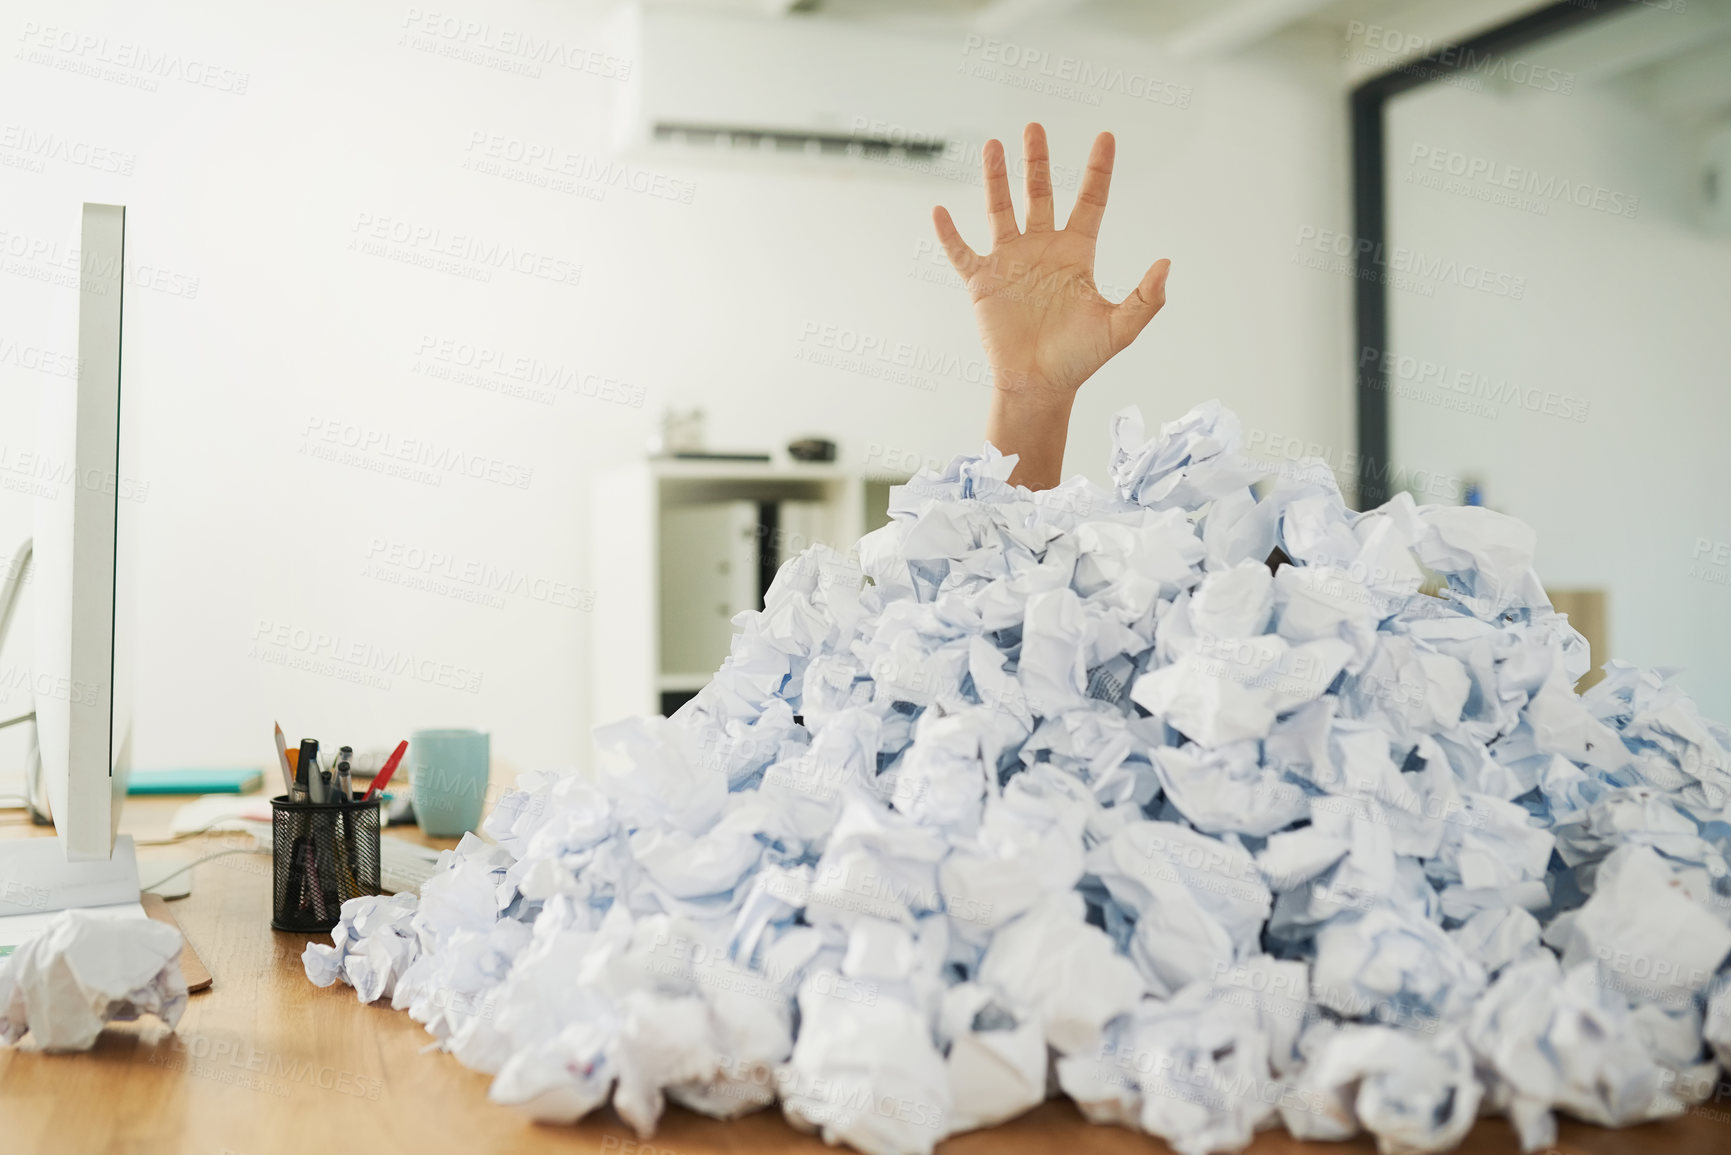 Buy stock photo Shot of an unidentifiable businesswoman drowning under a pile of paperwork in the office